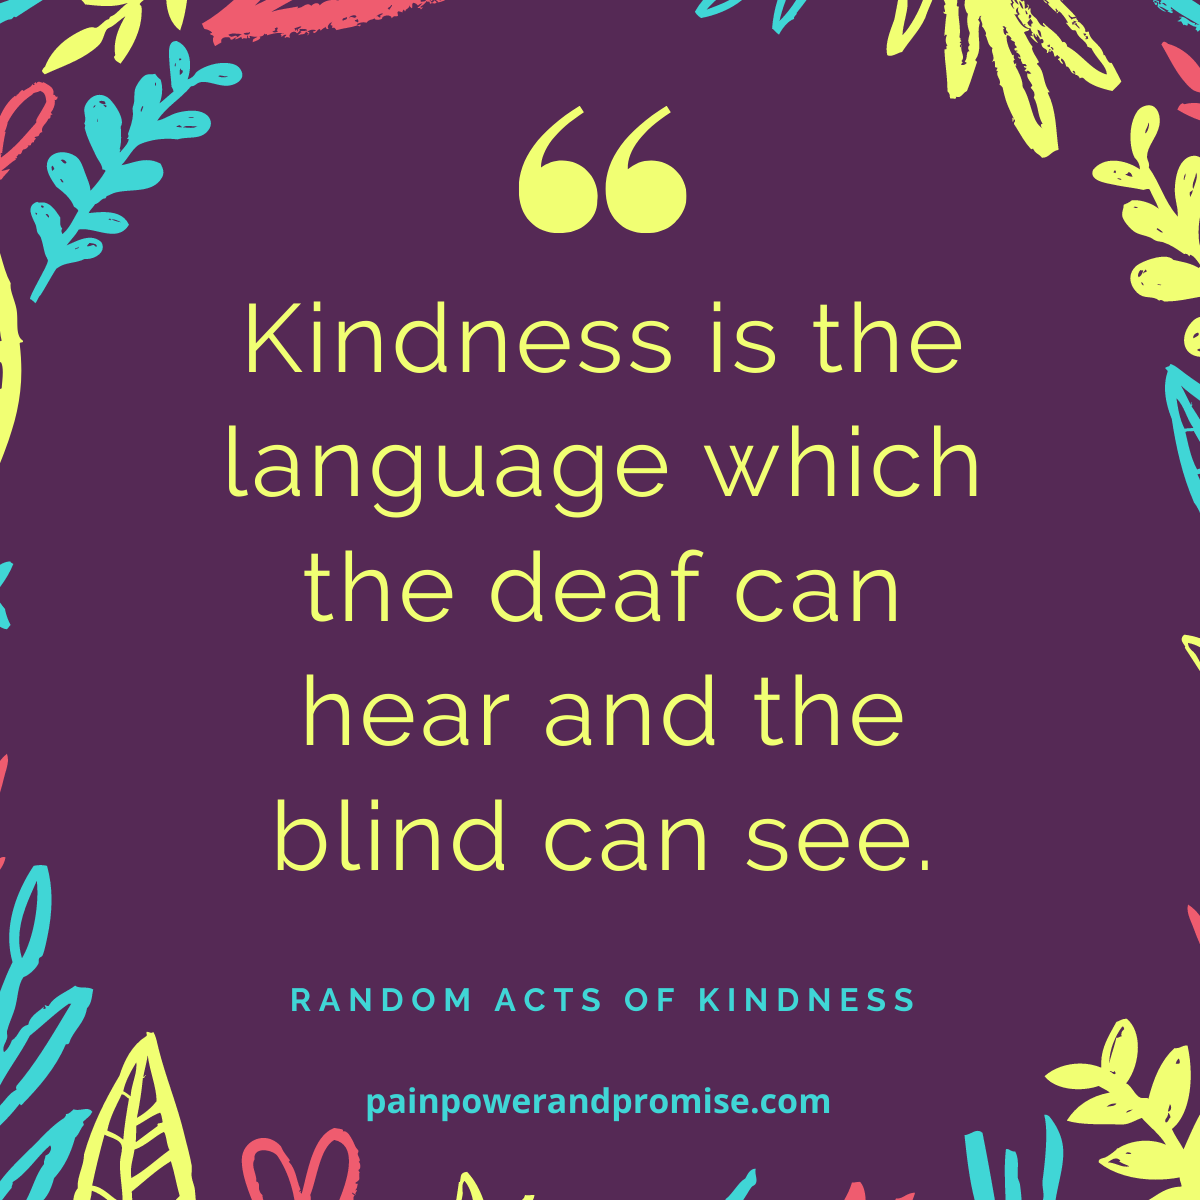 Inspirational Quote: Kindness is the language which the deaf can hear and the blind can see.